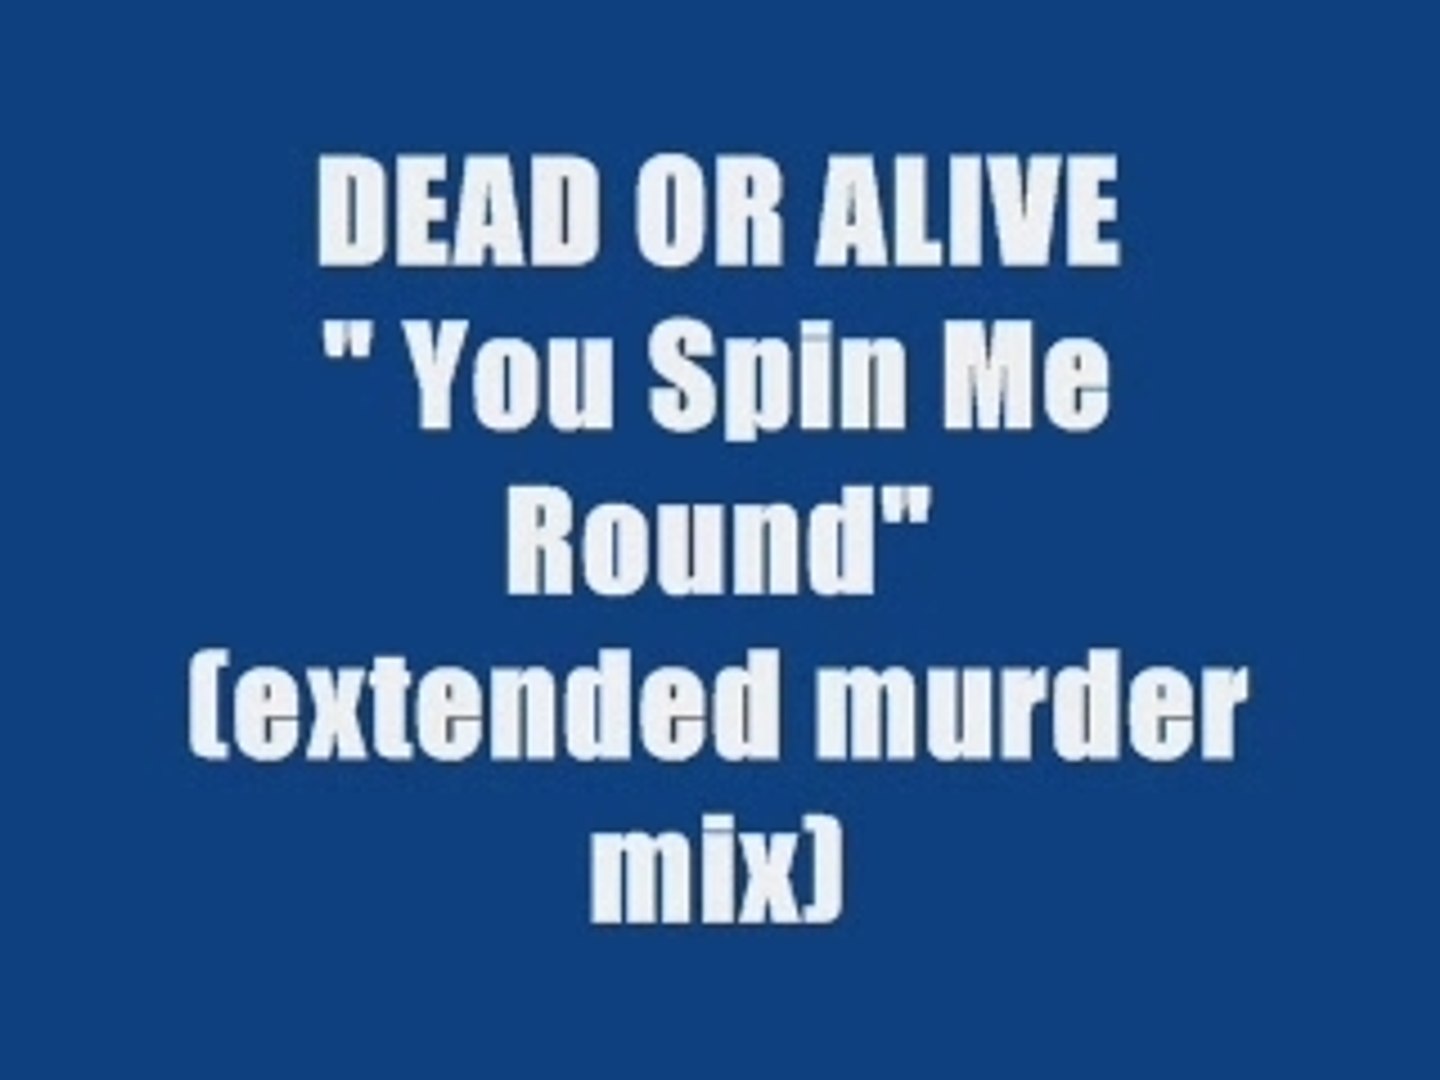 DEAD OR ALIVE - YOU SPIN ME ROUND (extended murder mix) - Vidéo ...